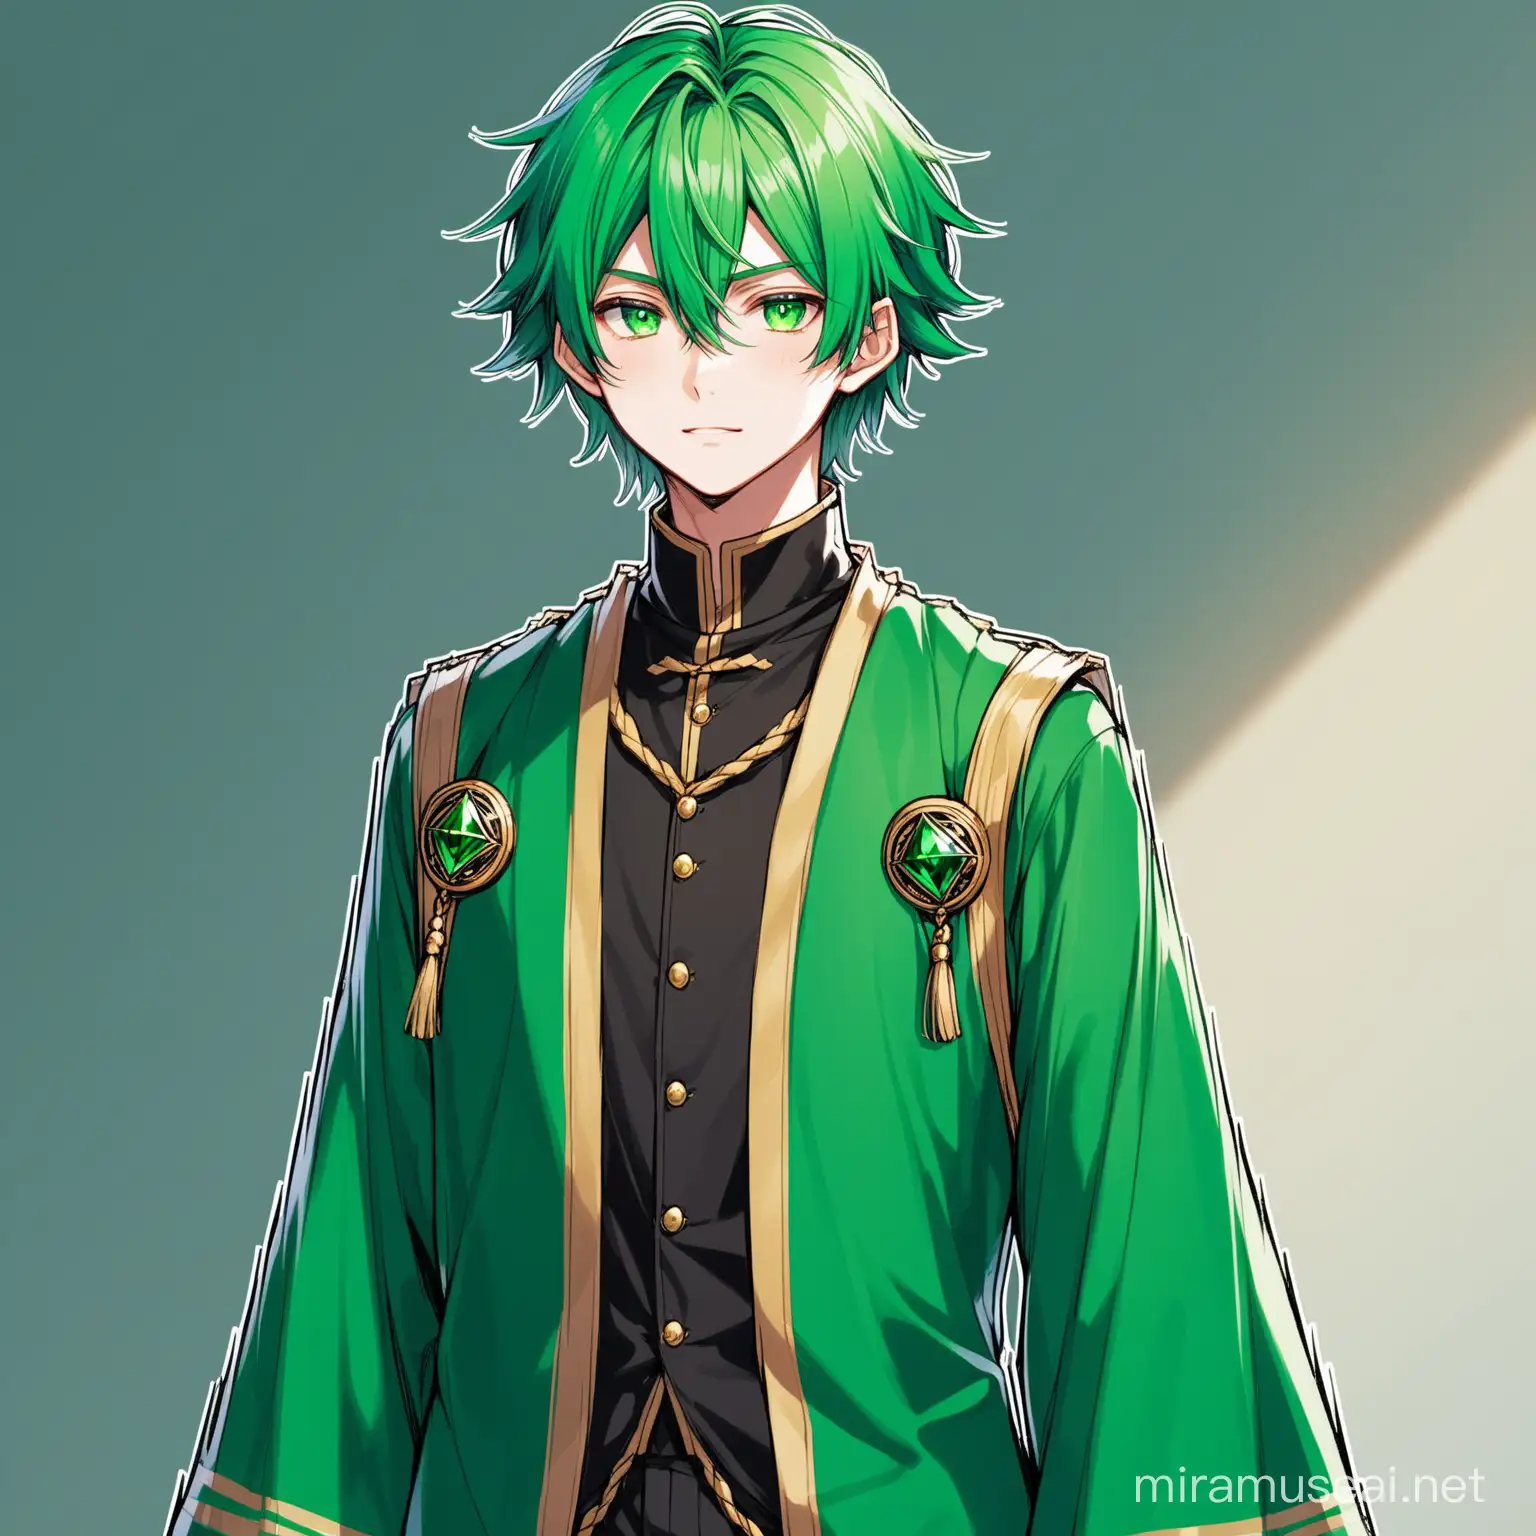 Young GreenHaired Male in Black and Green Magic Academy Attire with Emerald Eyes